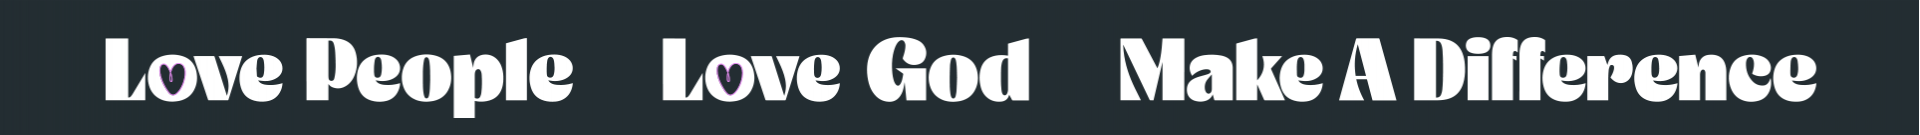 Love God, Love People, Make a Difference in a stylized font